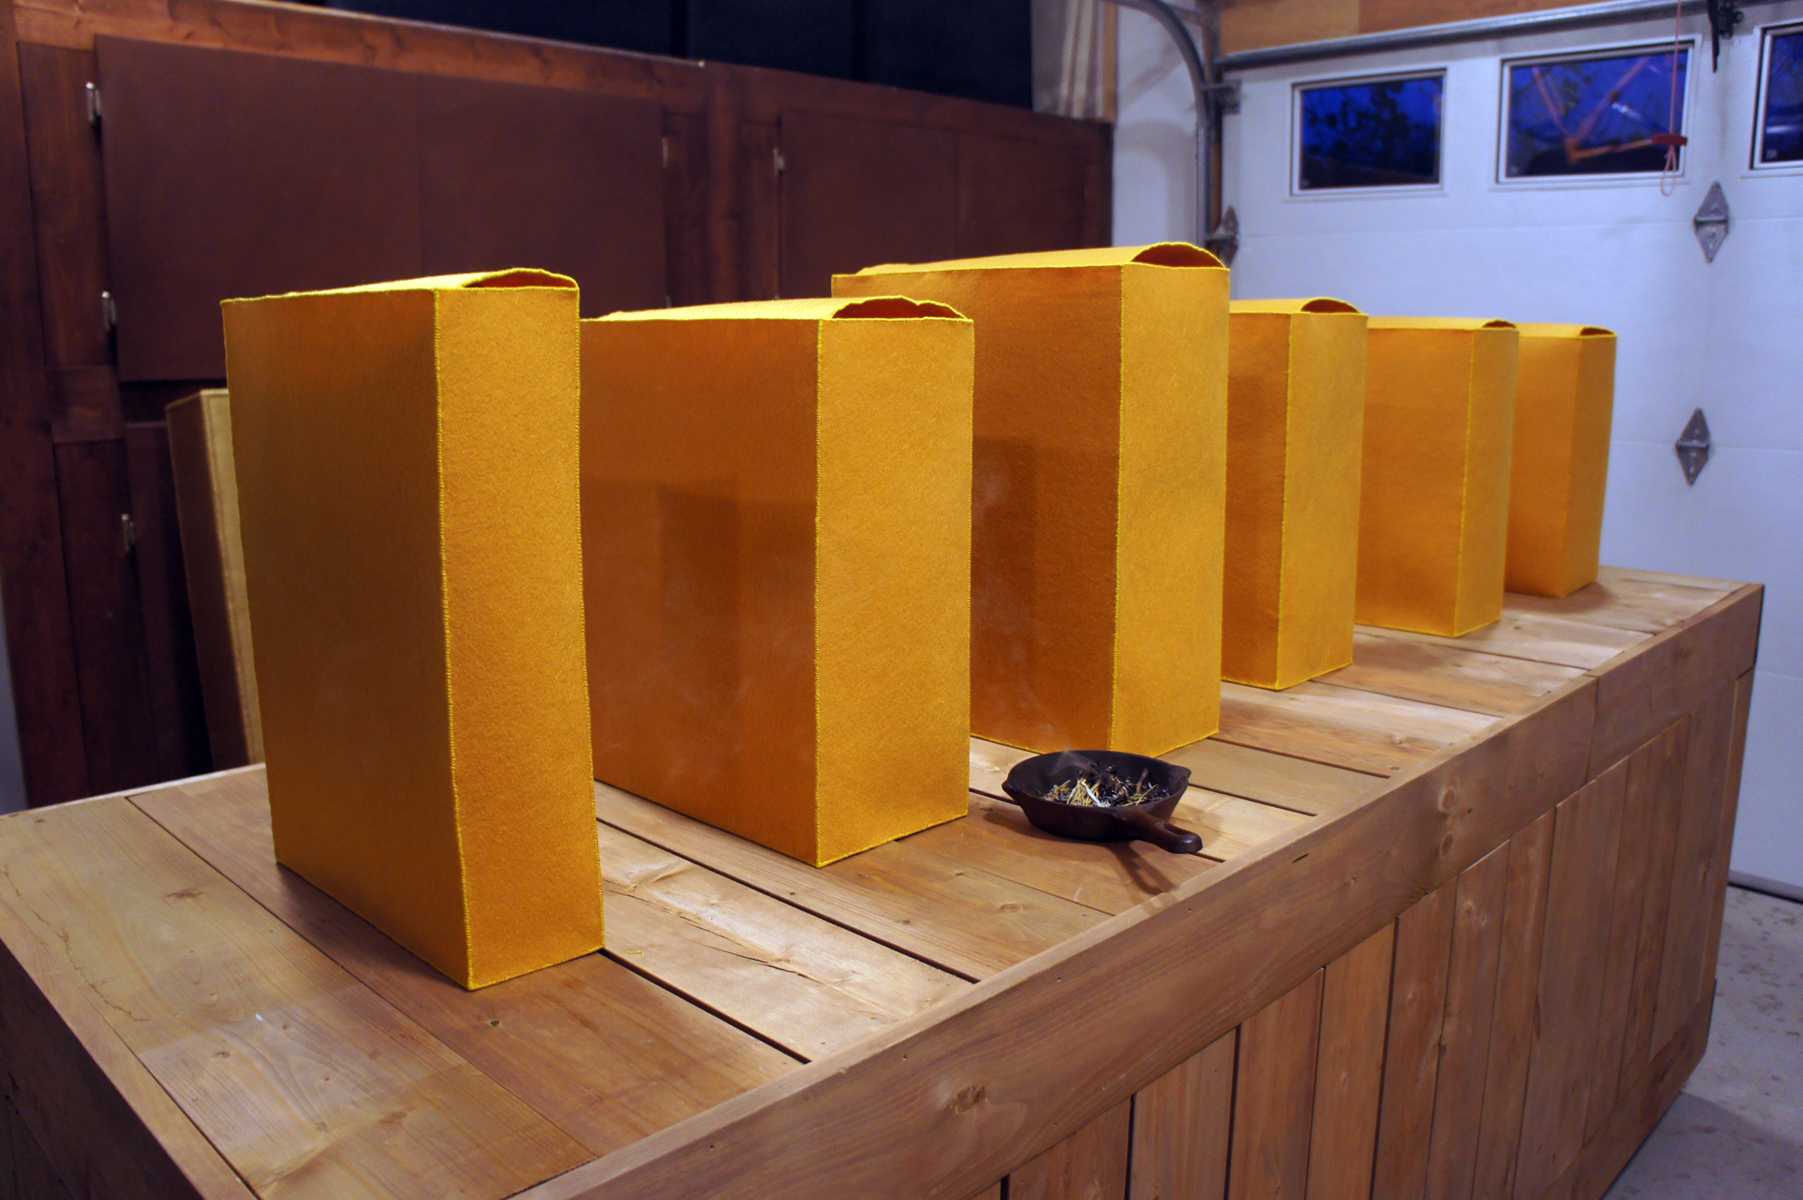 Golden-coloured boxes lined up in a row.